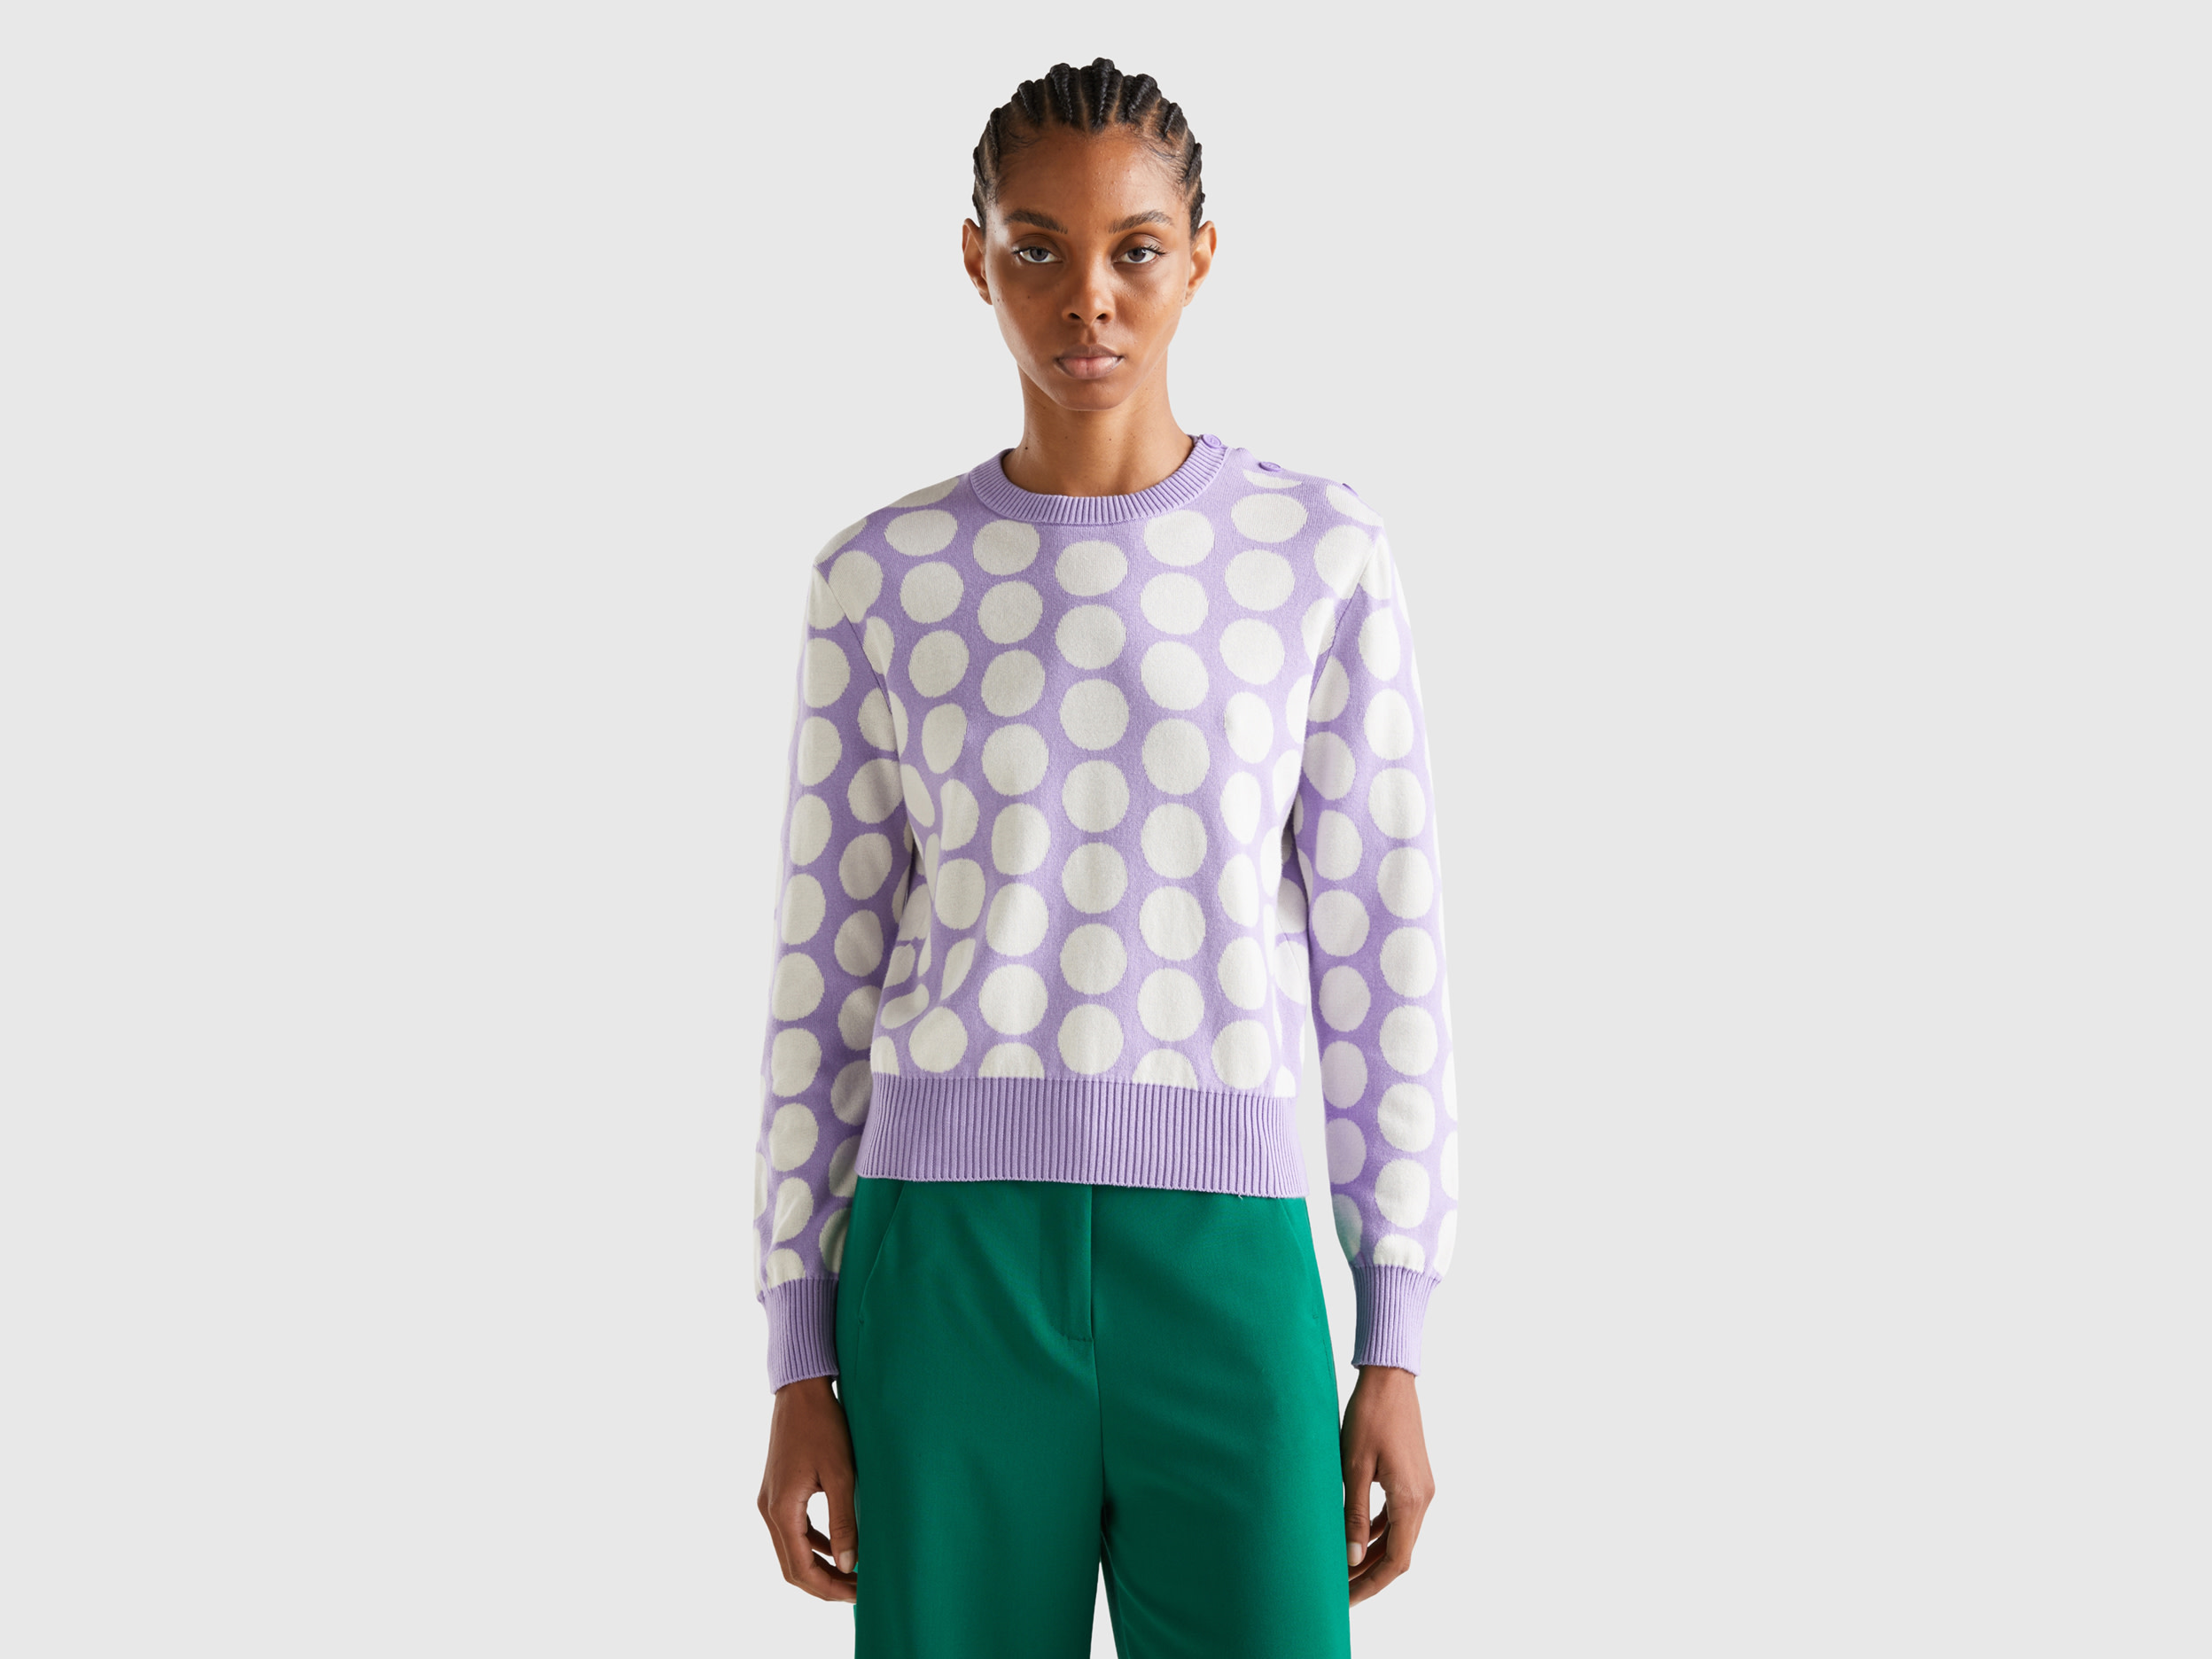 Benetton, Polka Dot Sweater In Tricot Cotton, size S, Lilac, Women